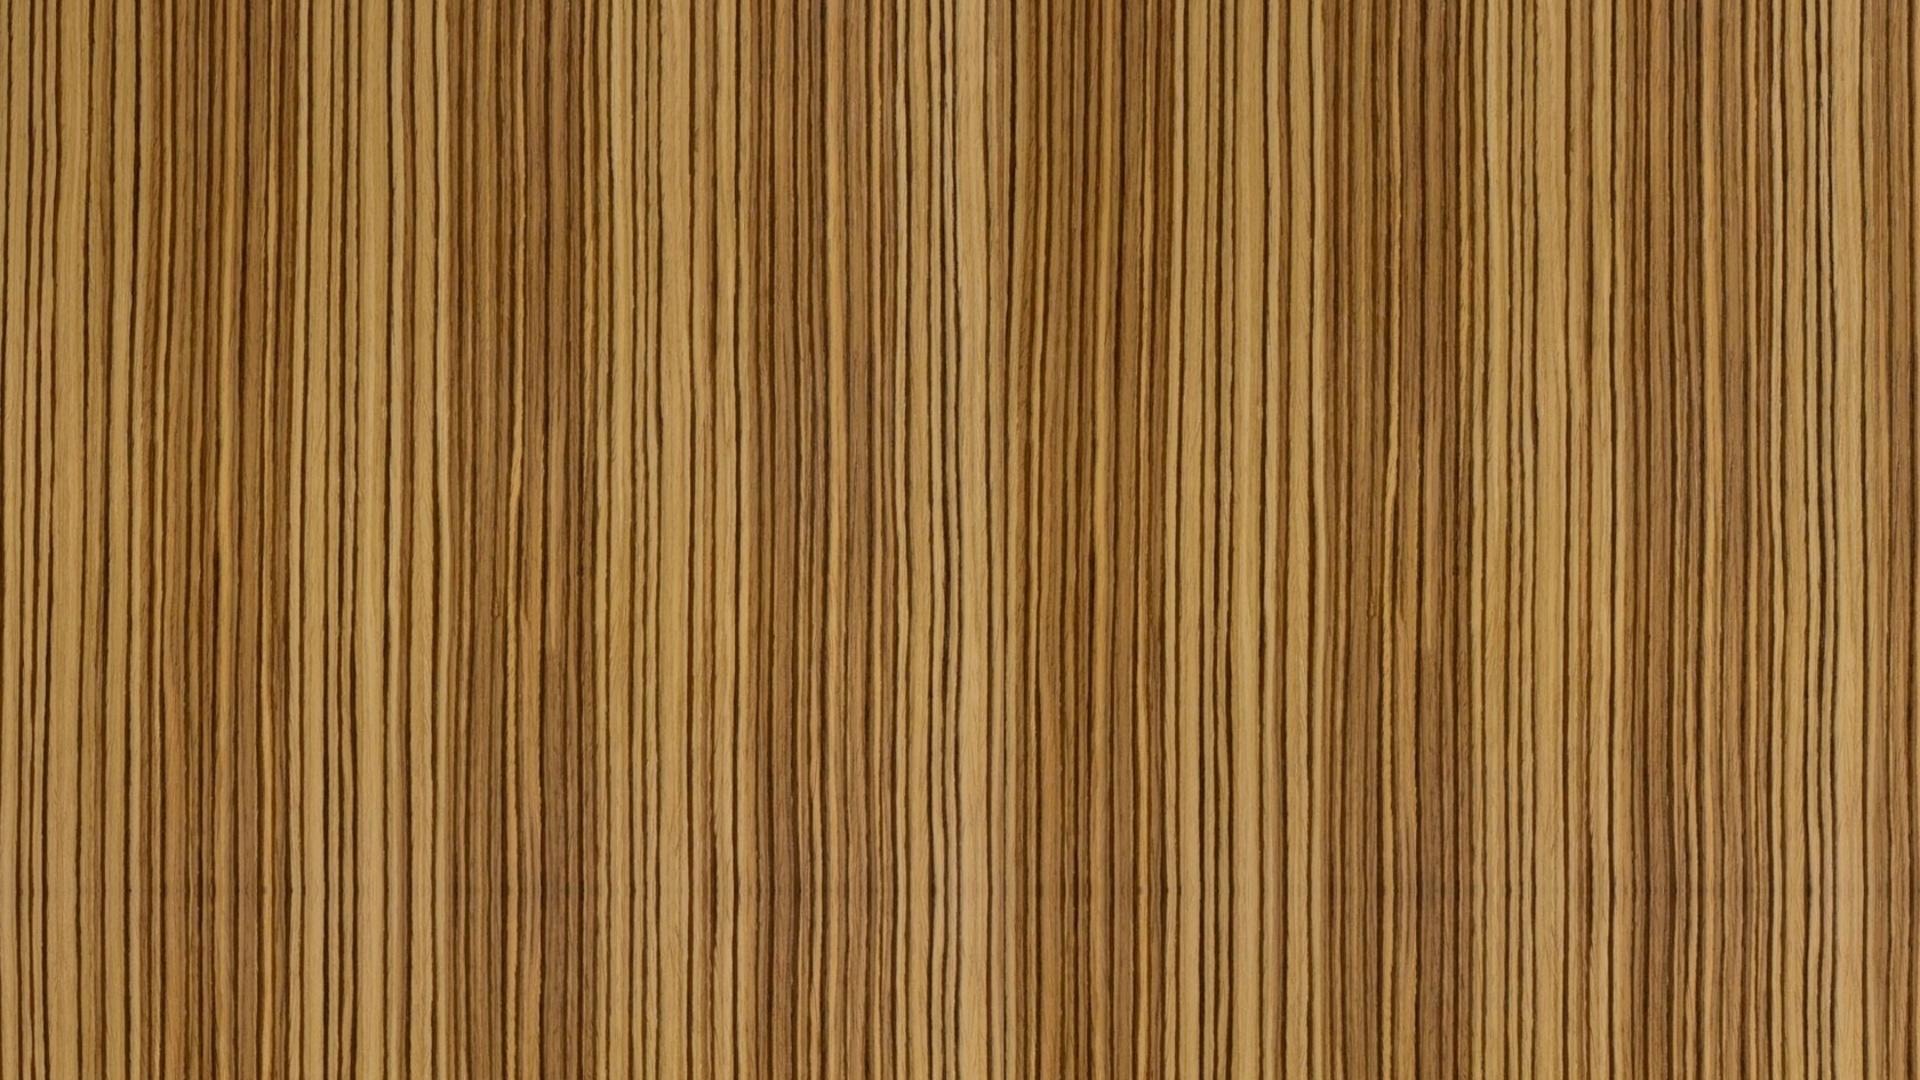 HD Wood Wallpaper Background For Free Download